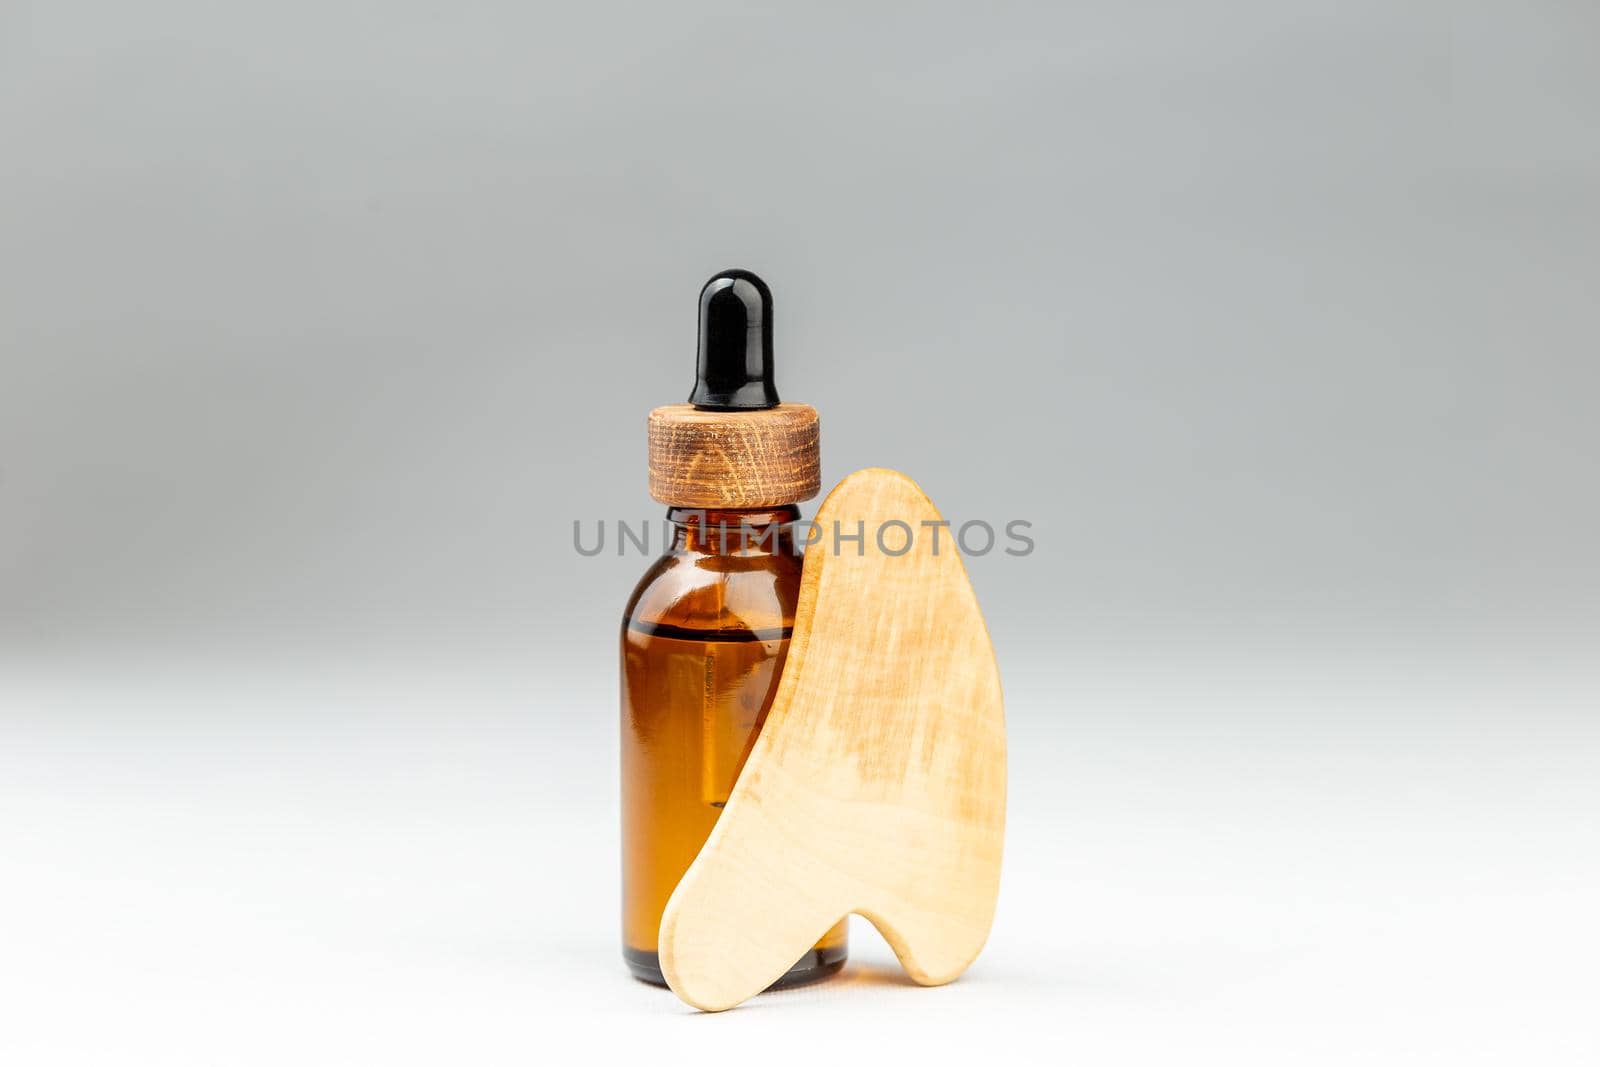 Oil bottle and gua sha wooden scraper massager tool at gray background. Beauty treatment concept. Copy text for text